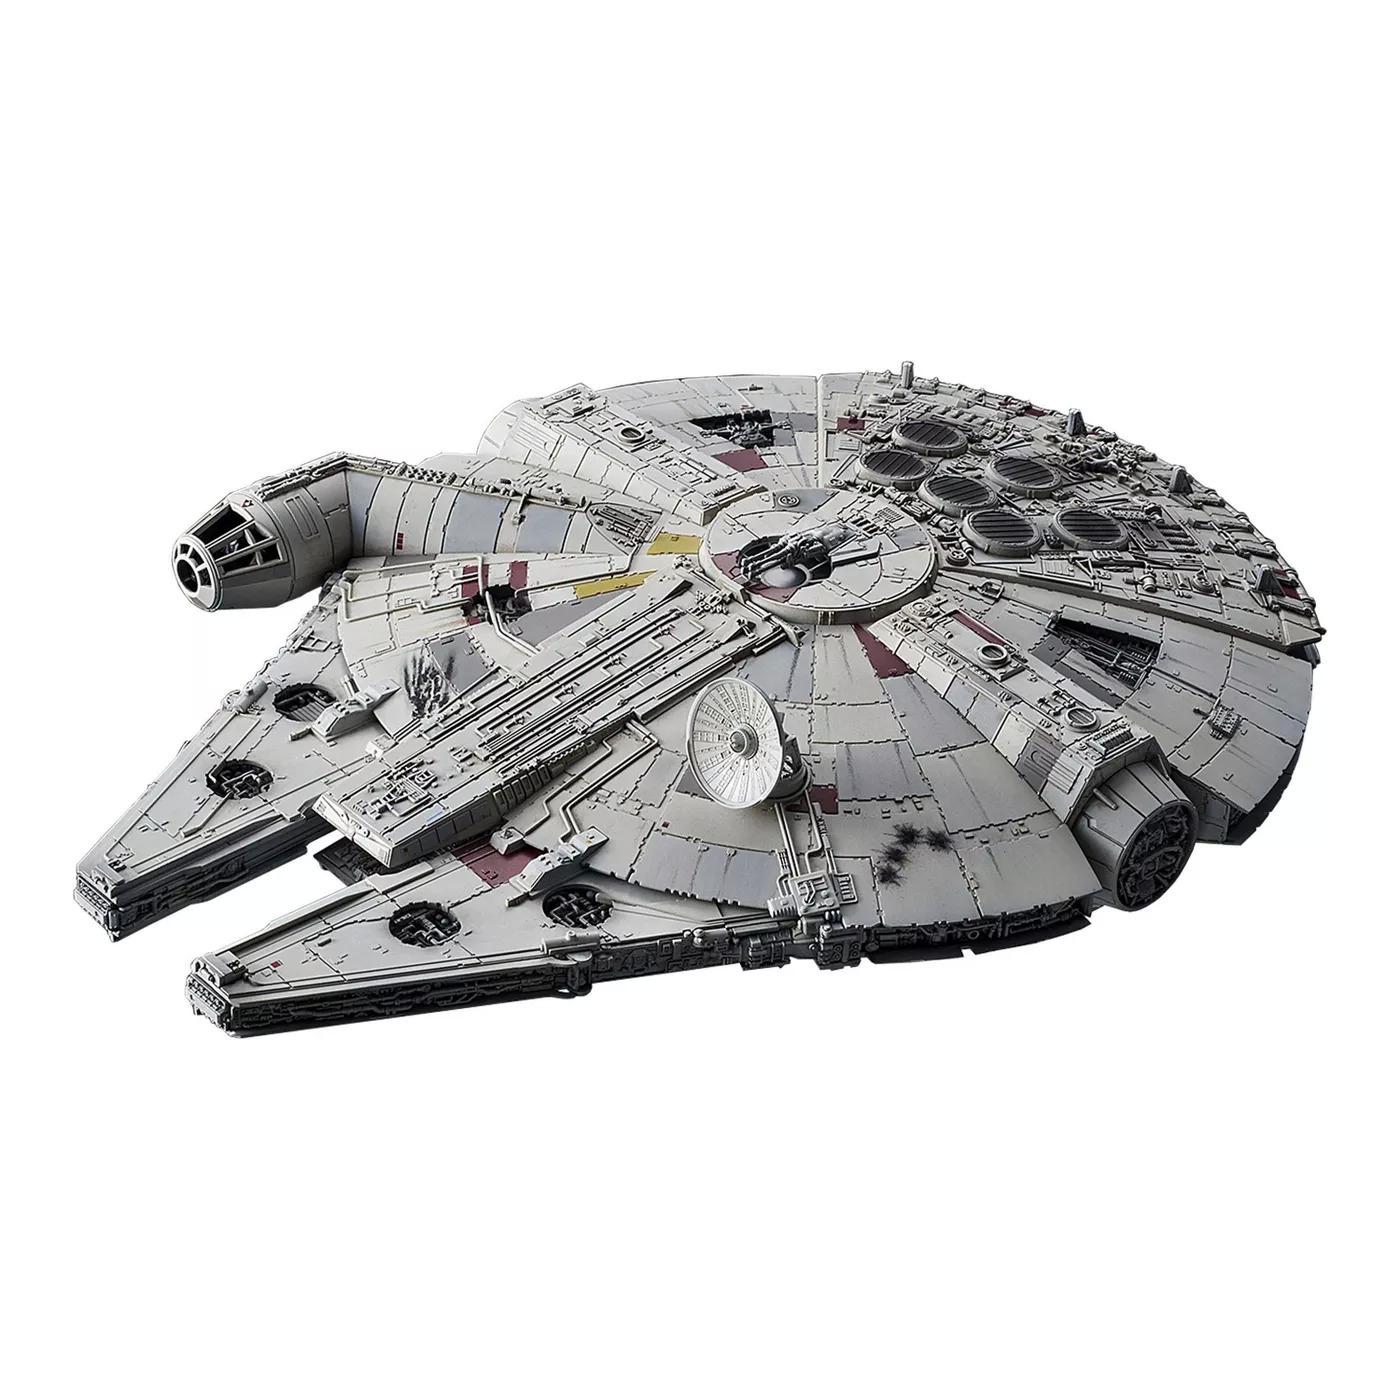 Bandai Star Wars The Rise of Skywalker Millennium Falcon Model for $29.99